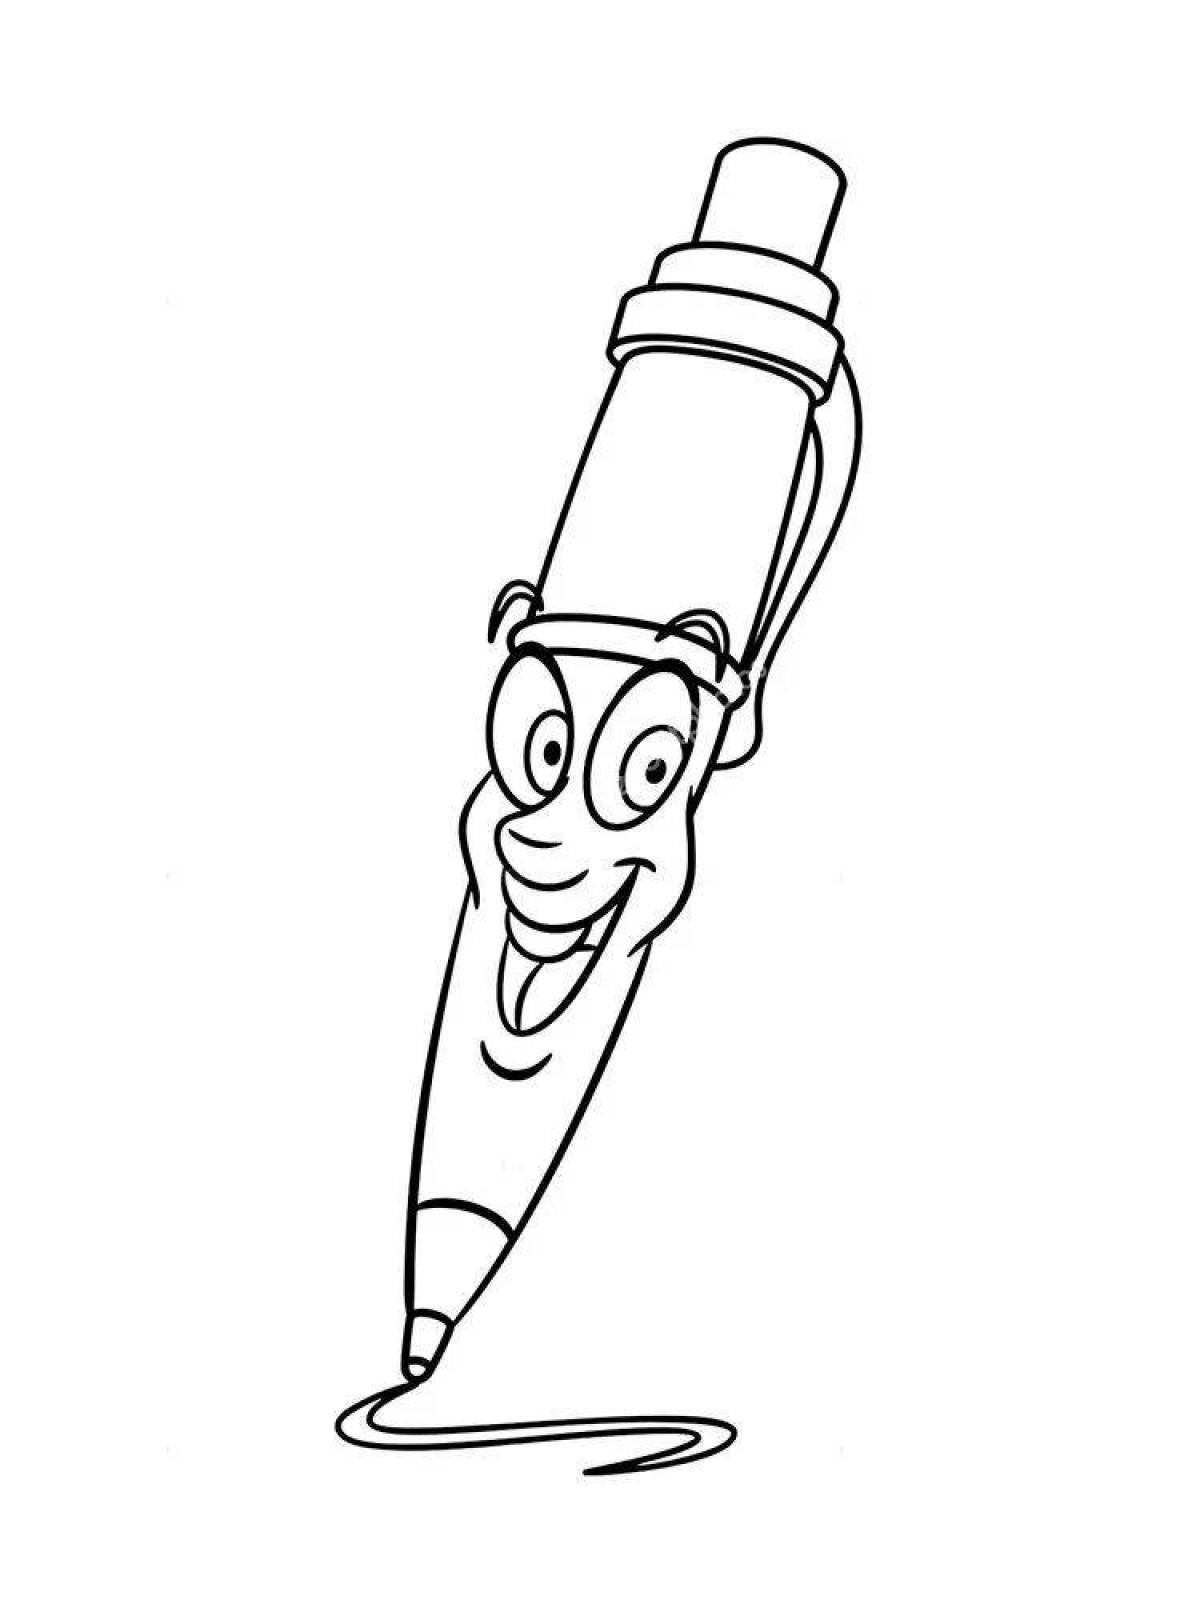 Colorful pen coloring page for kids